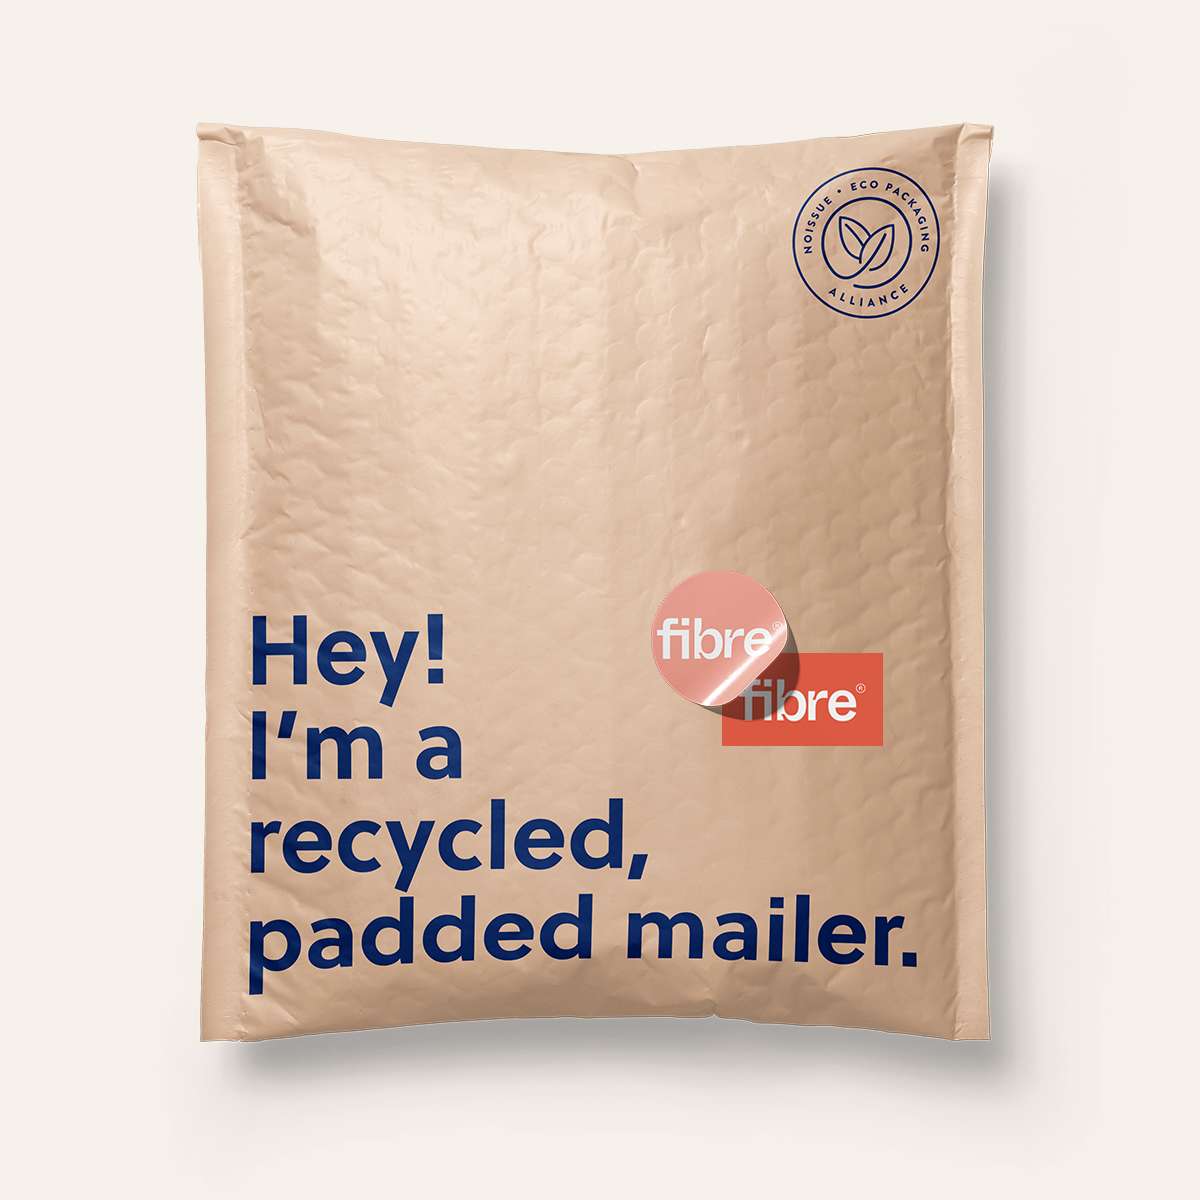 Padded mailer packaging example from brand noissue